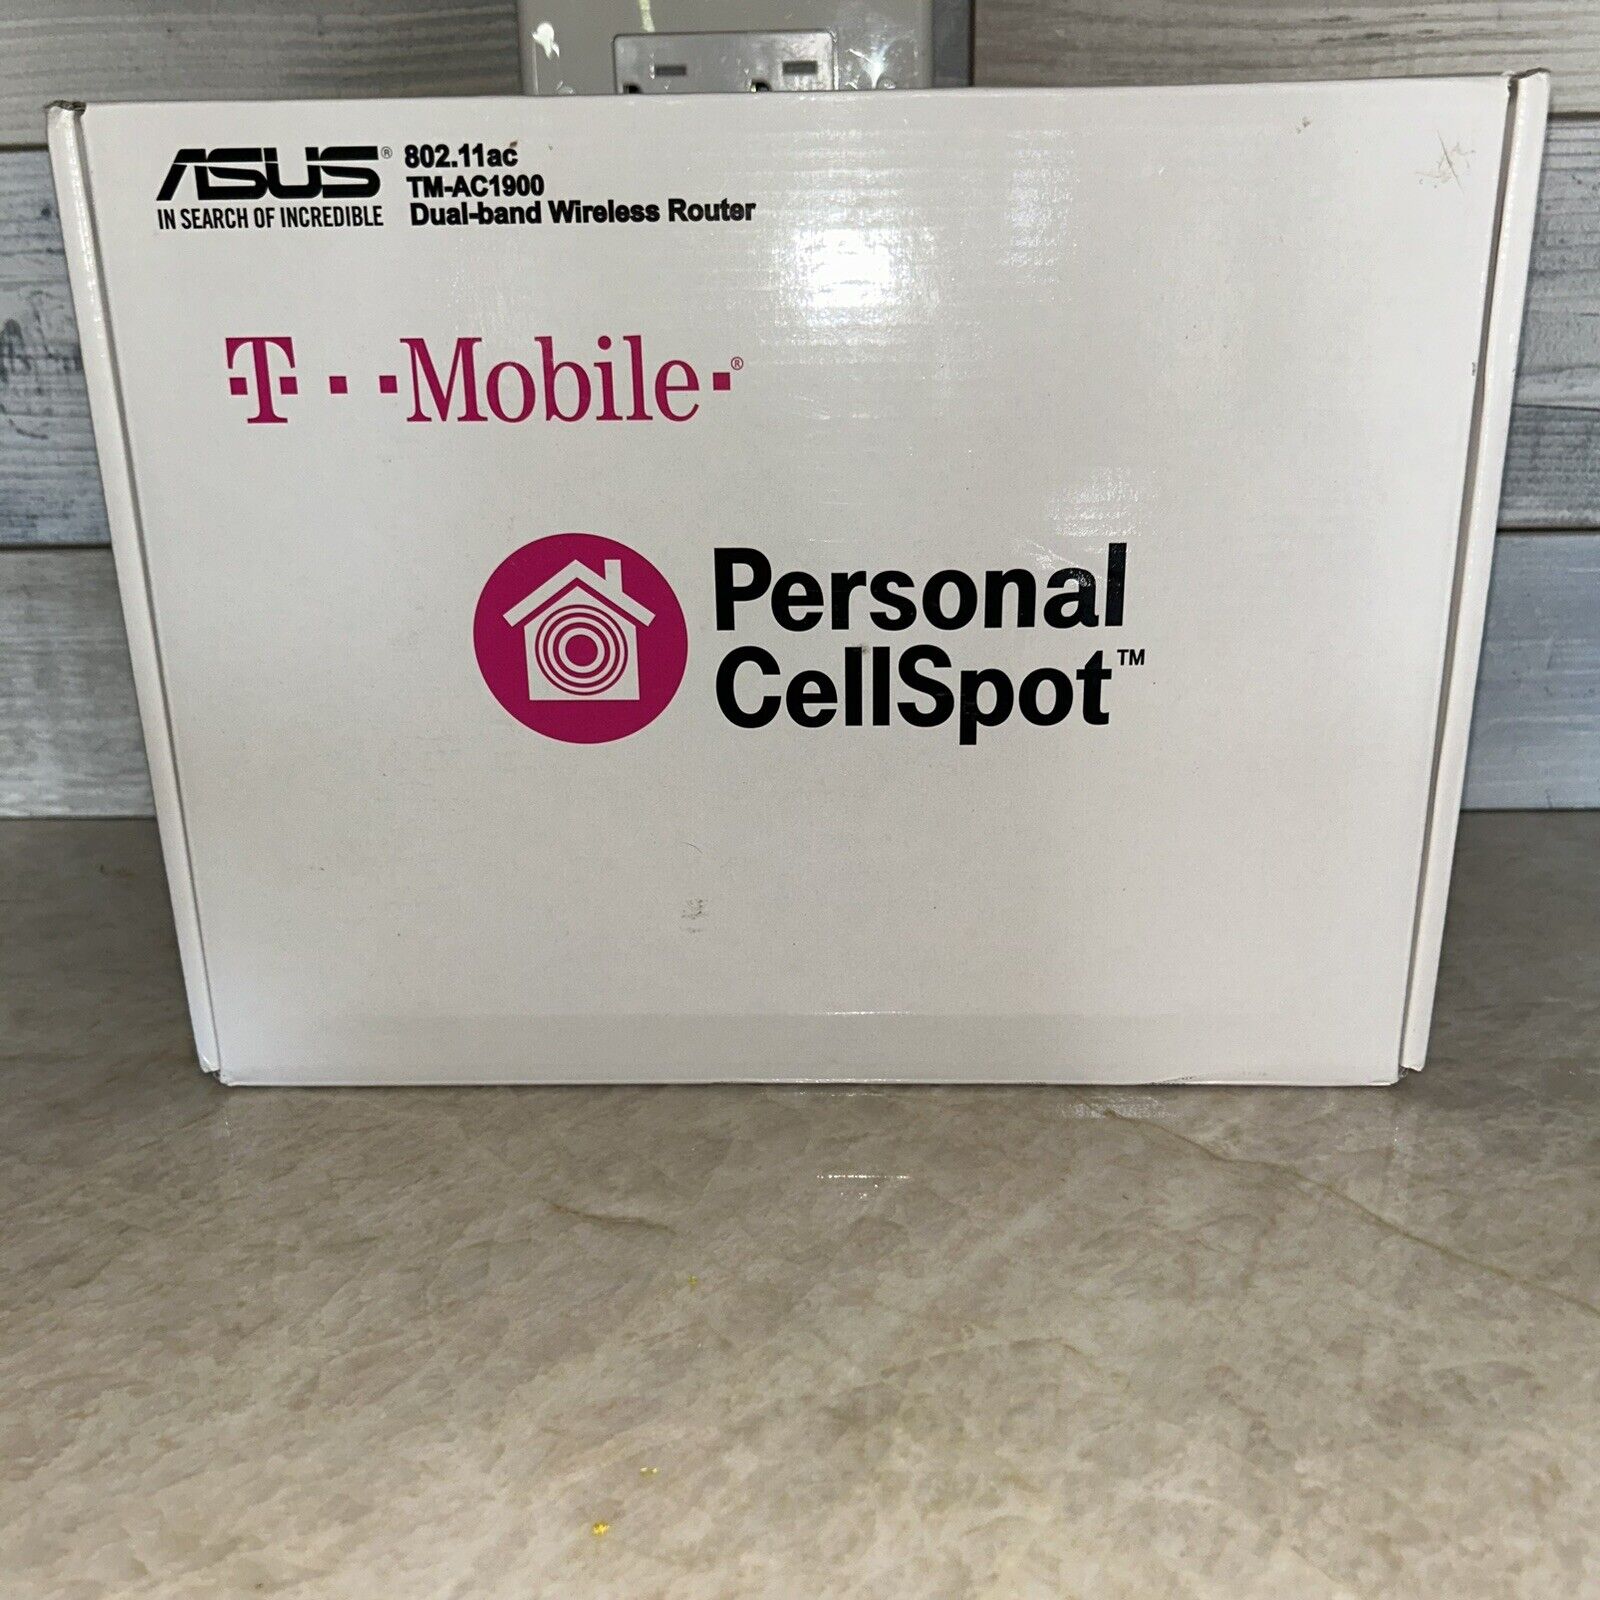 T-Mobile TM-AC1900 ASUS Personal CellSpot Wi-Fi Wireless Router - Open Box